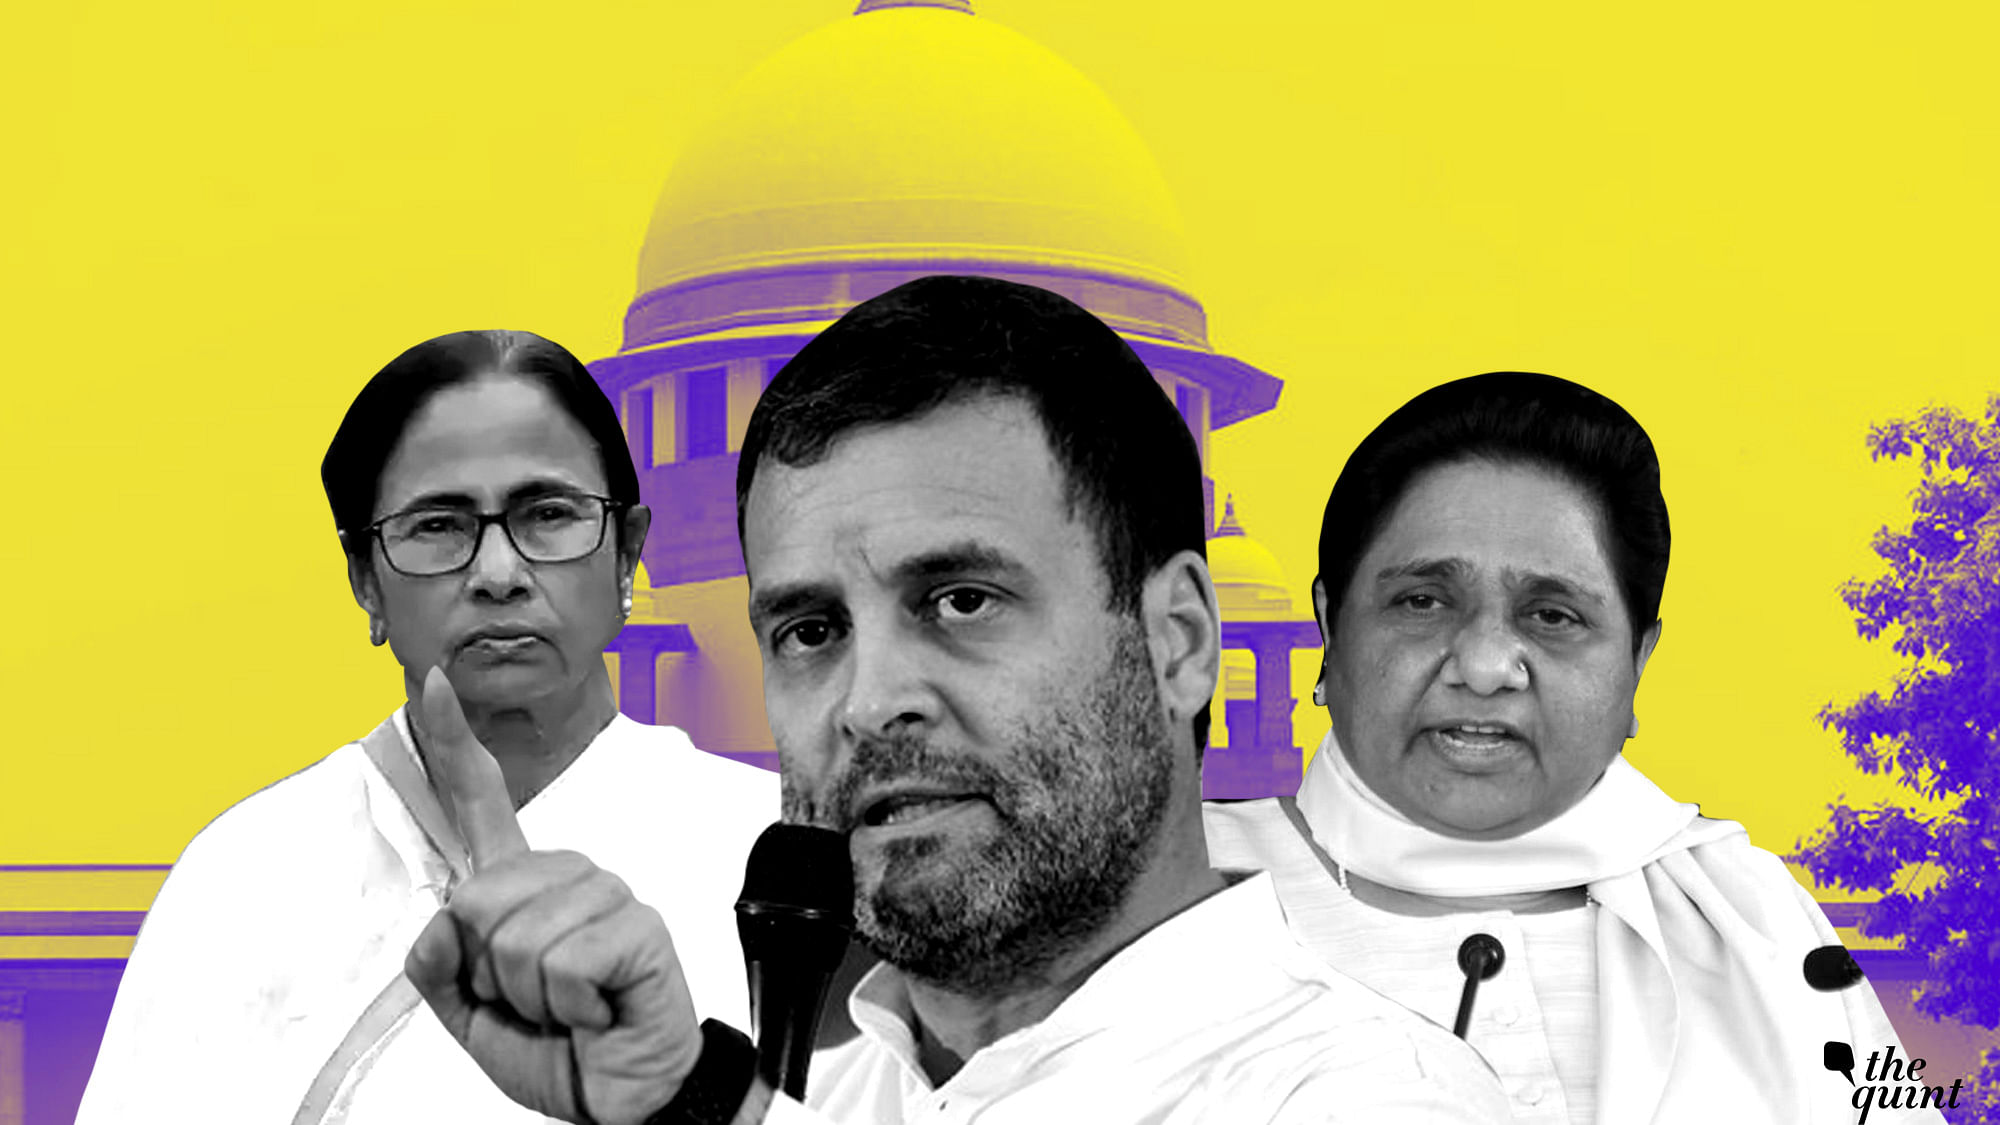 Congress President Rahul Gandhi refused to be drawn on questions about who would be prime minister if the BJP is defeated in the 2019 elections.